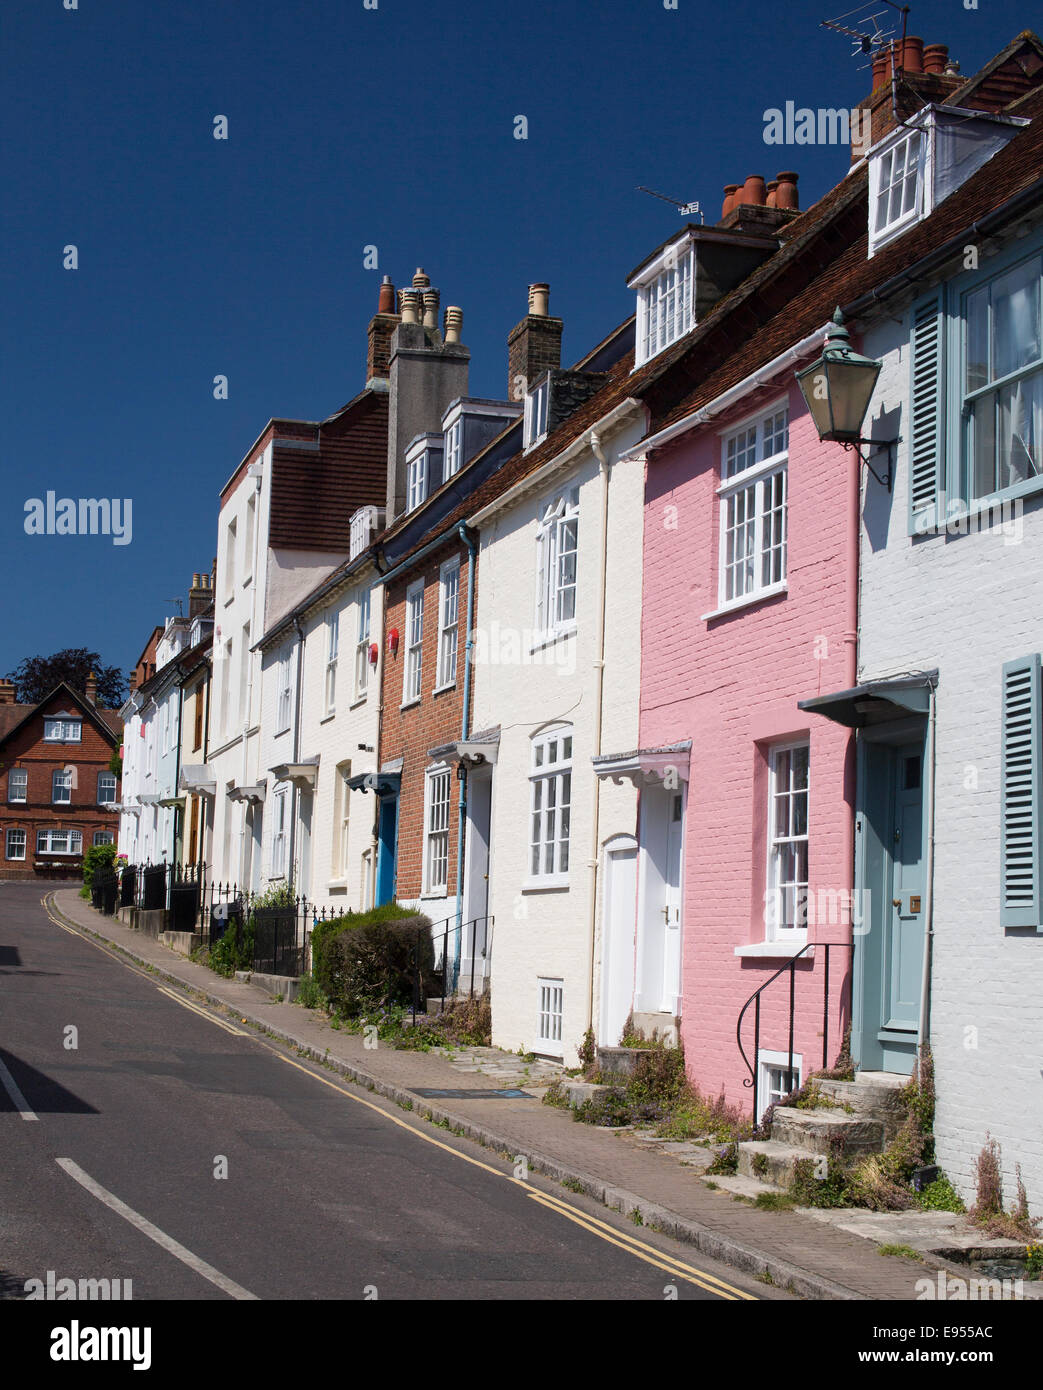 The colourful old cottages of Nelson Place, Lymington, Hampshire, England, UK. Stock Photo